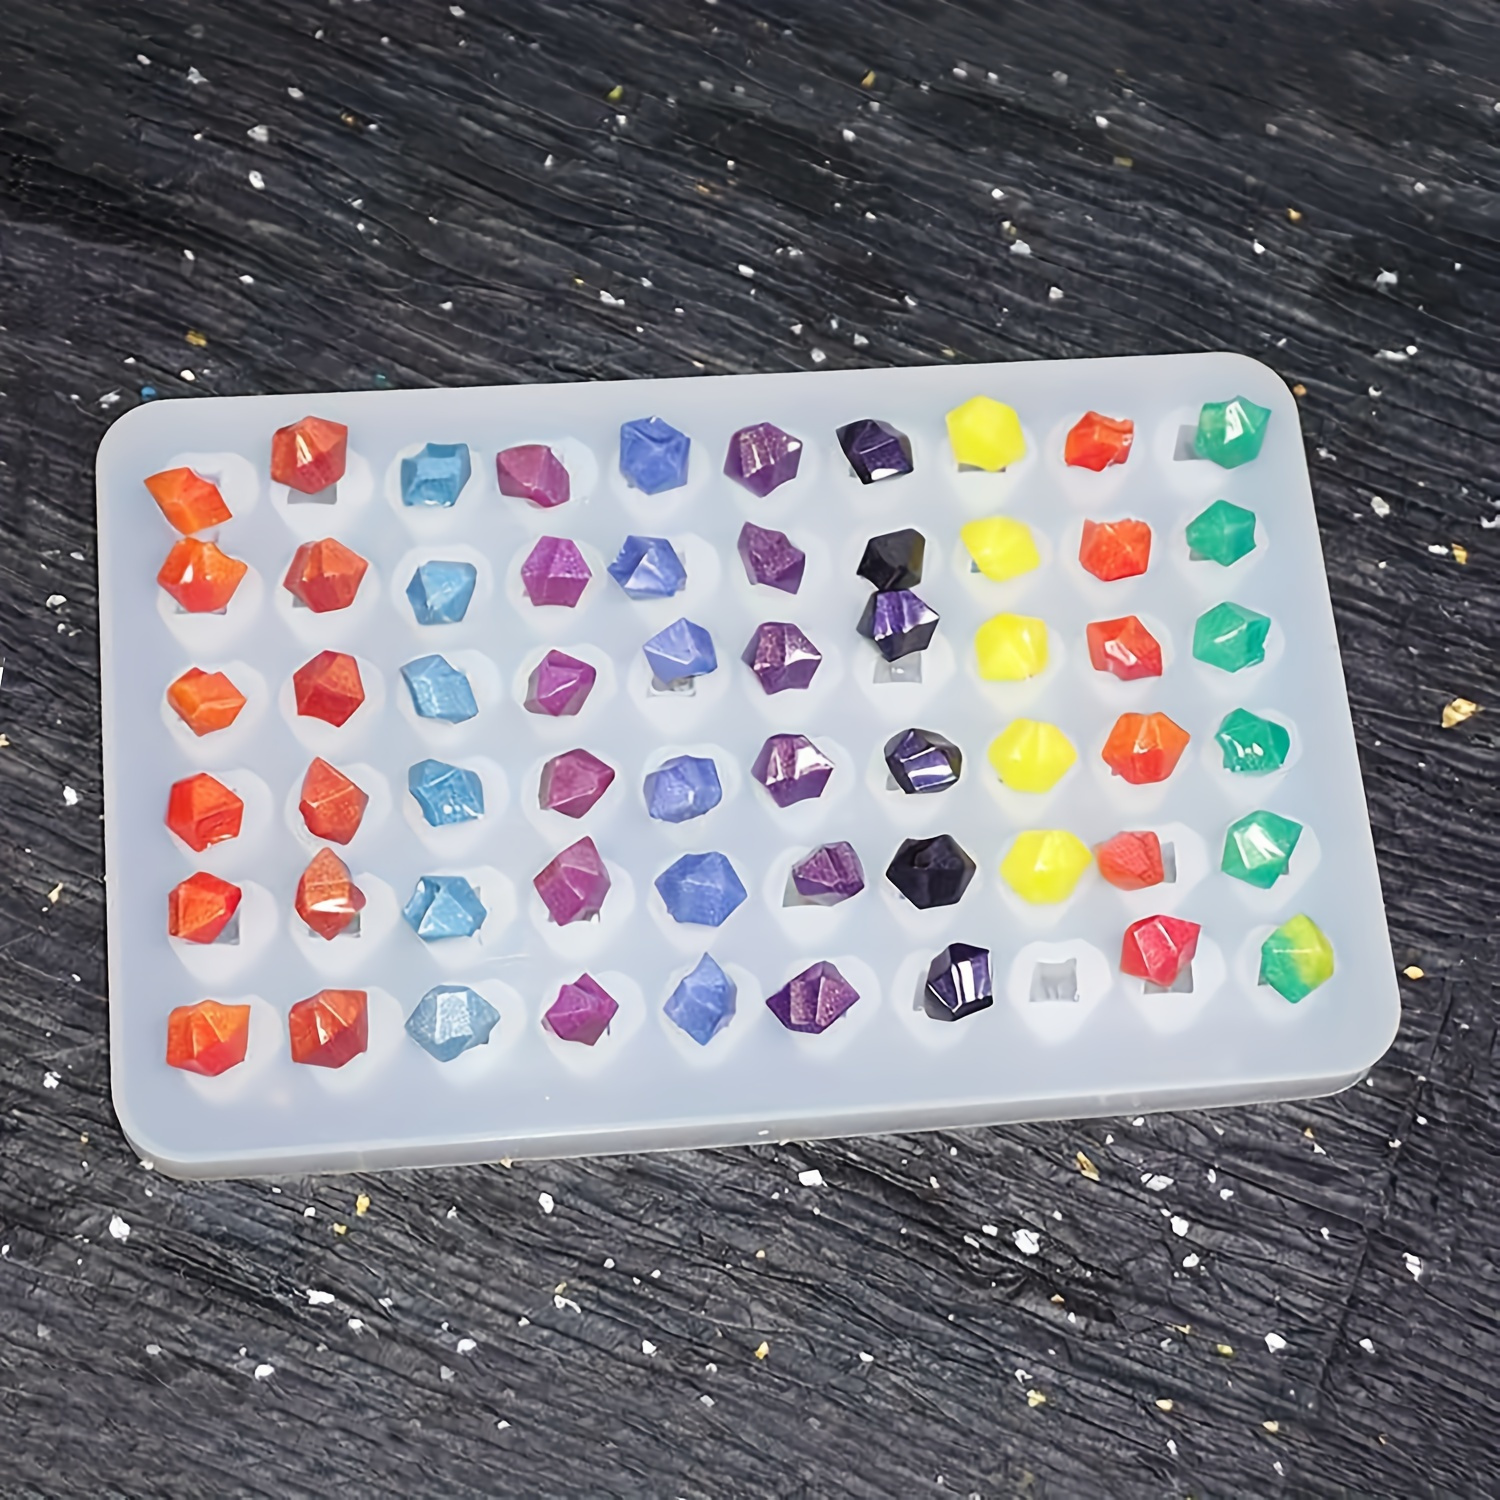 

Crystal Stones Silicone Mold For Resin, Resin Mold Craft Makes 60 Crystals, Candles, Soap, Ice Cube, Jewelry